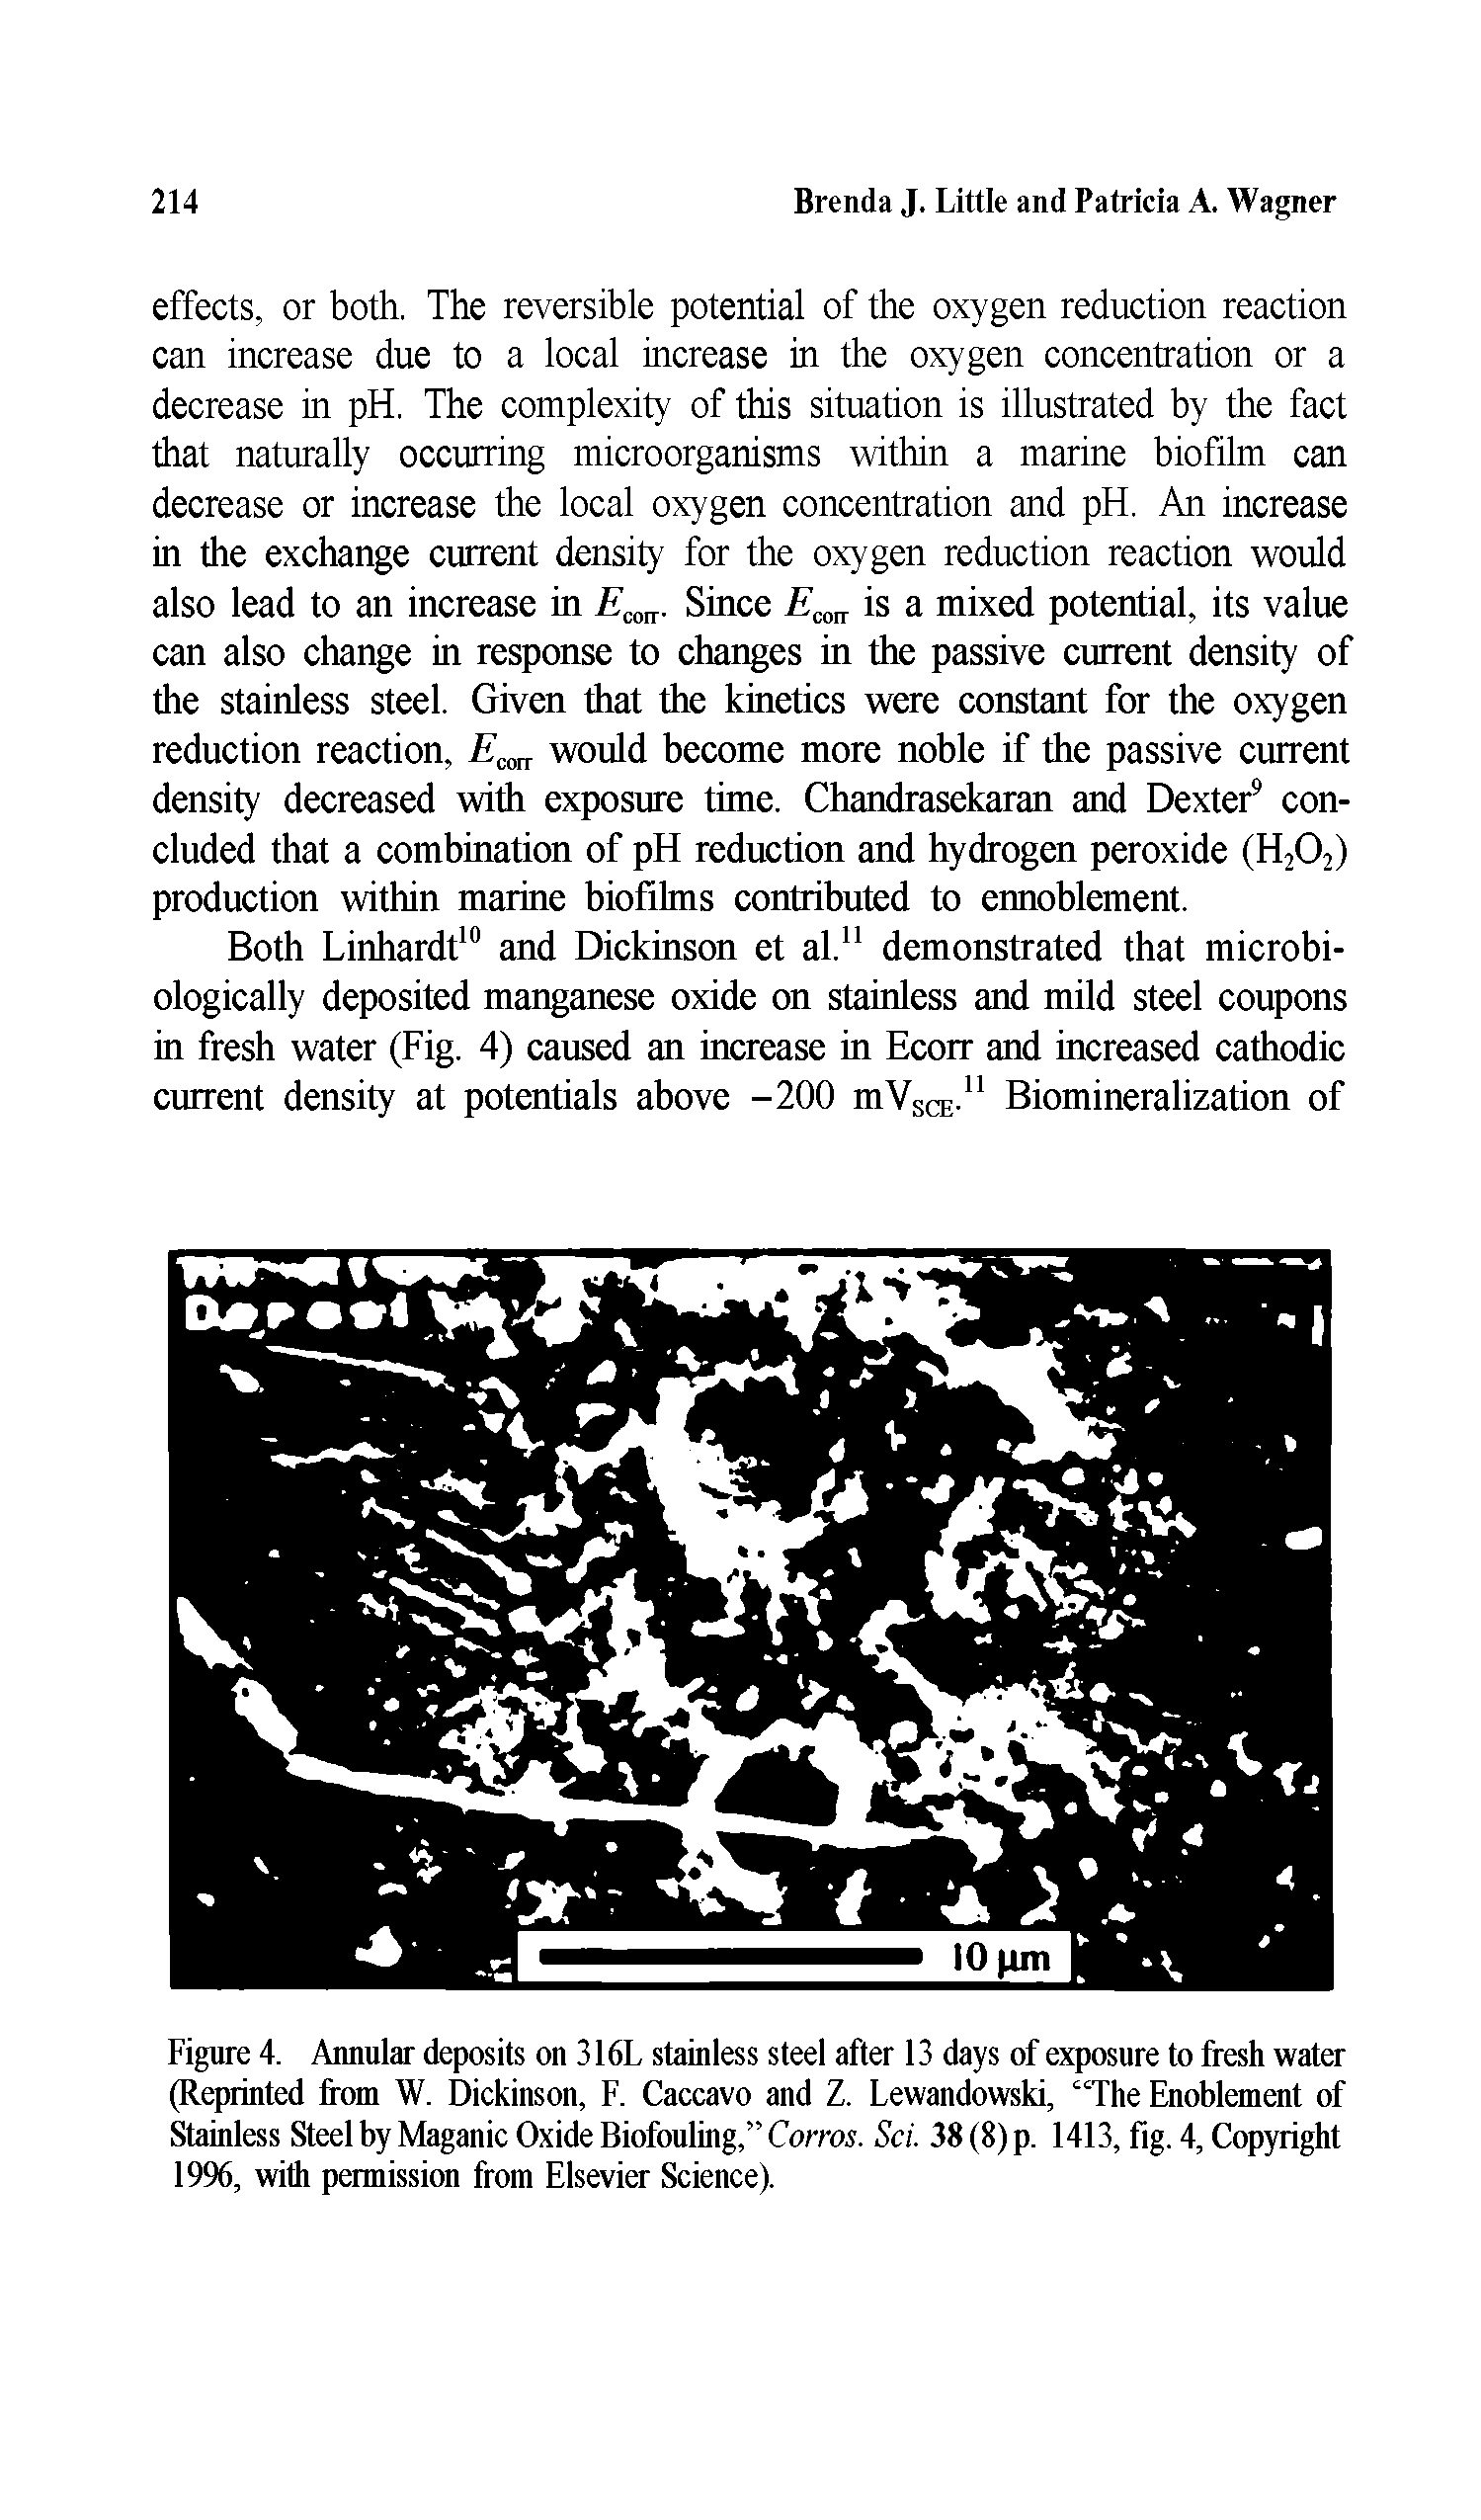 Figure 4. Annular deposits on 316L stainless steel after 13 days of exposure to fresh water (Reprinted from W. Dickinson, F. Caccavo and Z. Lewandowski, The Enoblement of Stainless Steel by Maganic Oxide Biofouling, Corns. Sci. 38 (8) p. 1413, fig. 4, Copyright 1996, with permission from Elsevier Science).